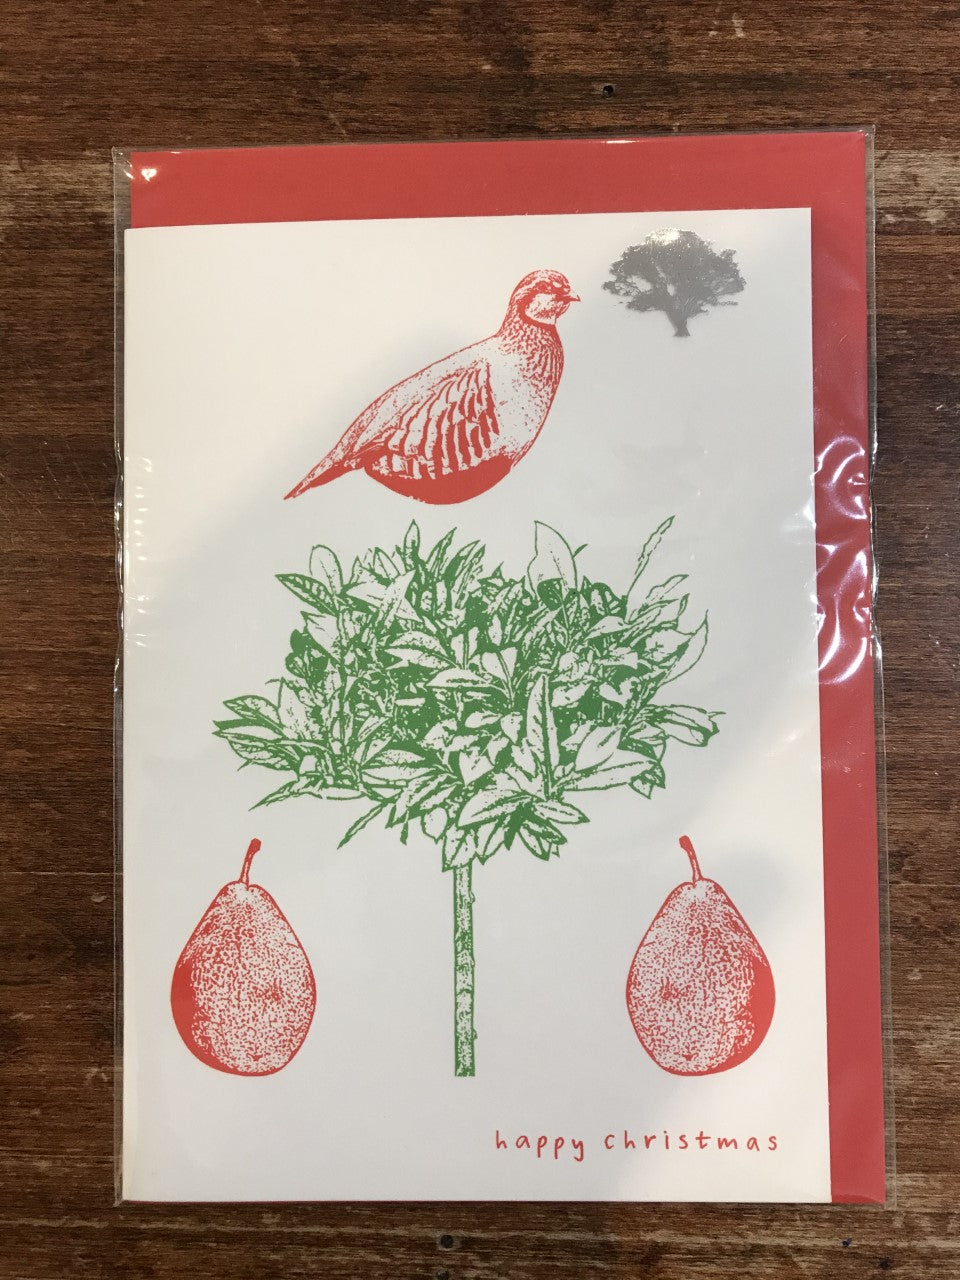 Lonetree Cards Christmas Card-In a Pear Tree